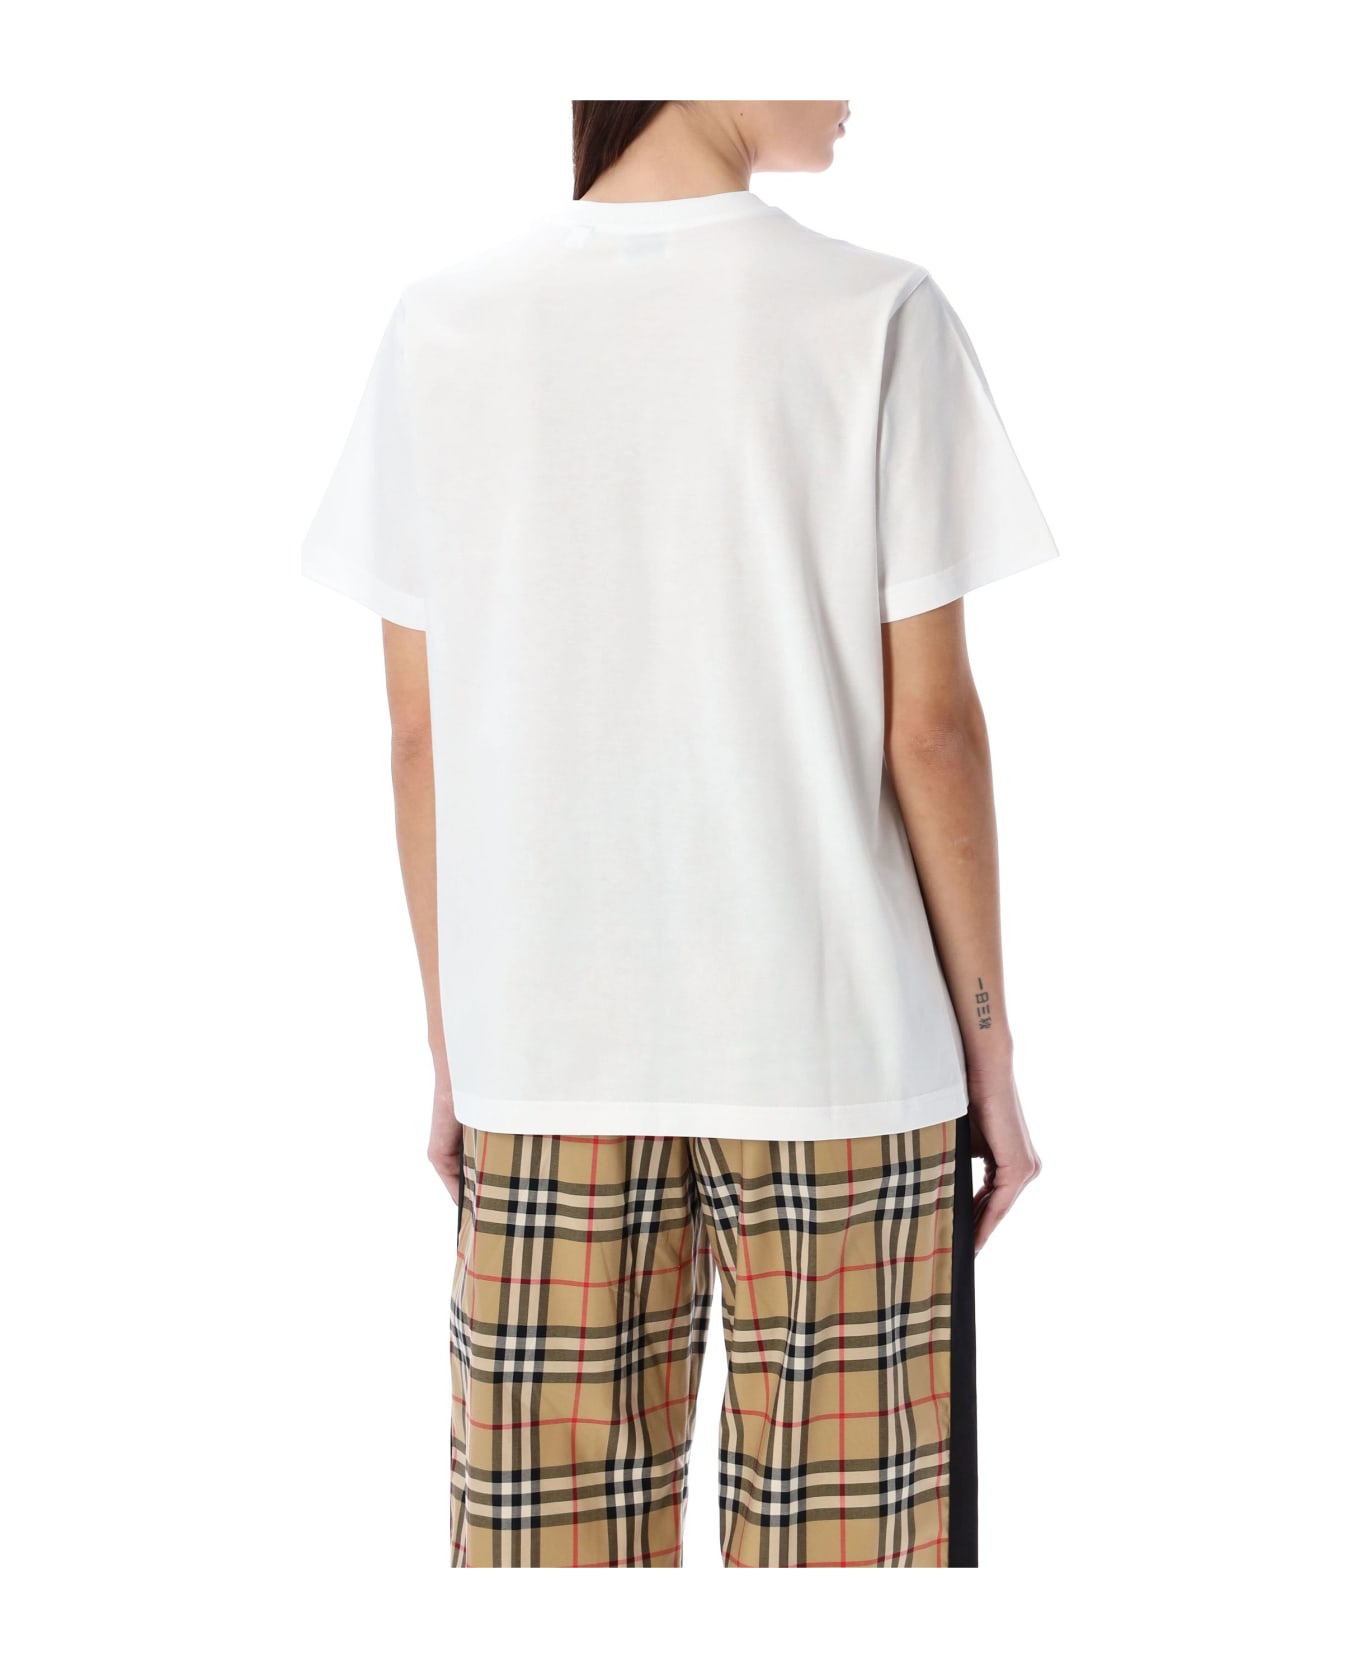 Burberry London Embroidered T-shirt - WHITE